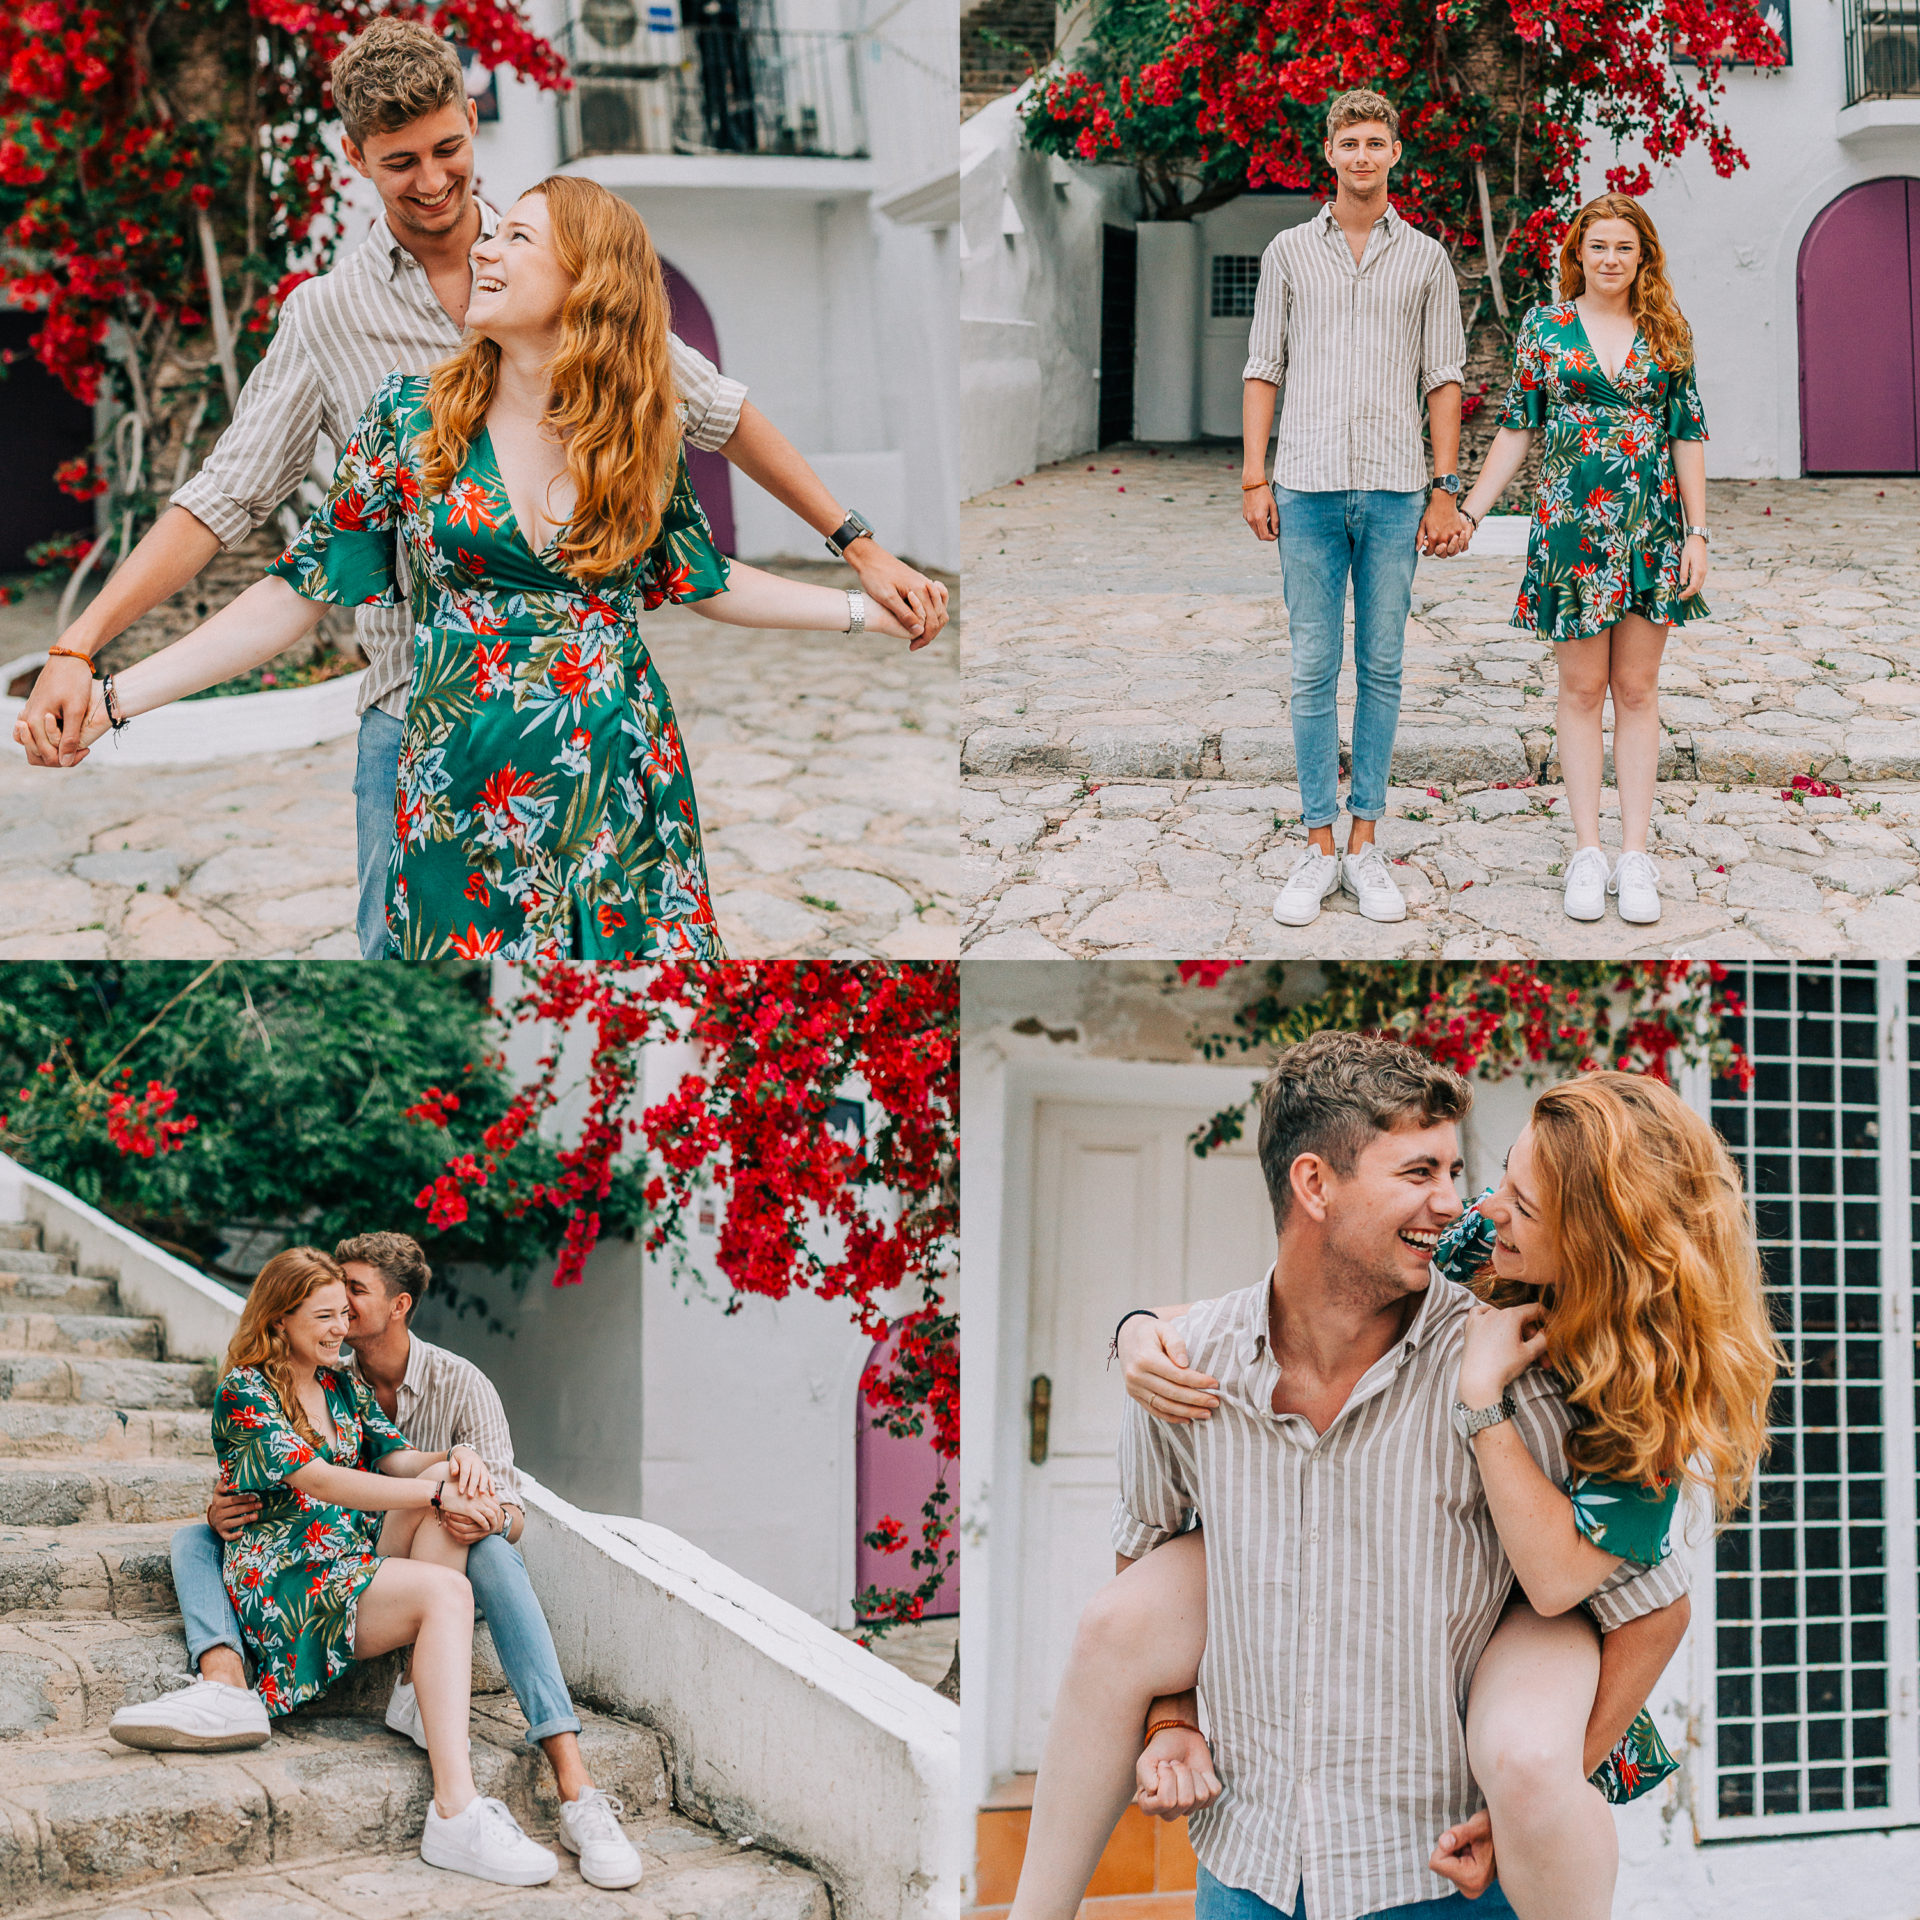 Martijn-Julia-Preview-1920x1920 How to Choose the Right Location for Your Couple Photo Session Engagement How-to 